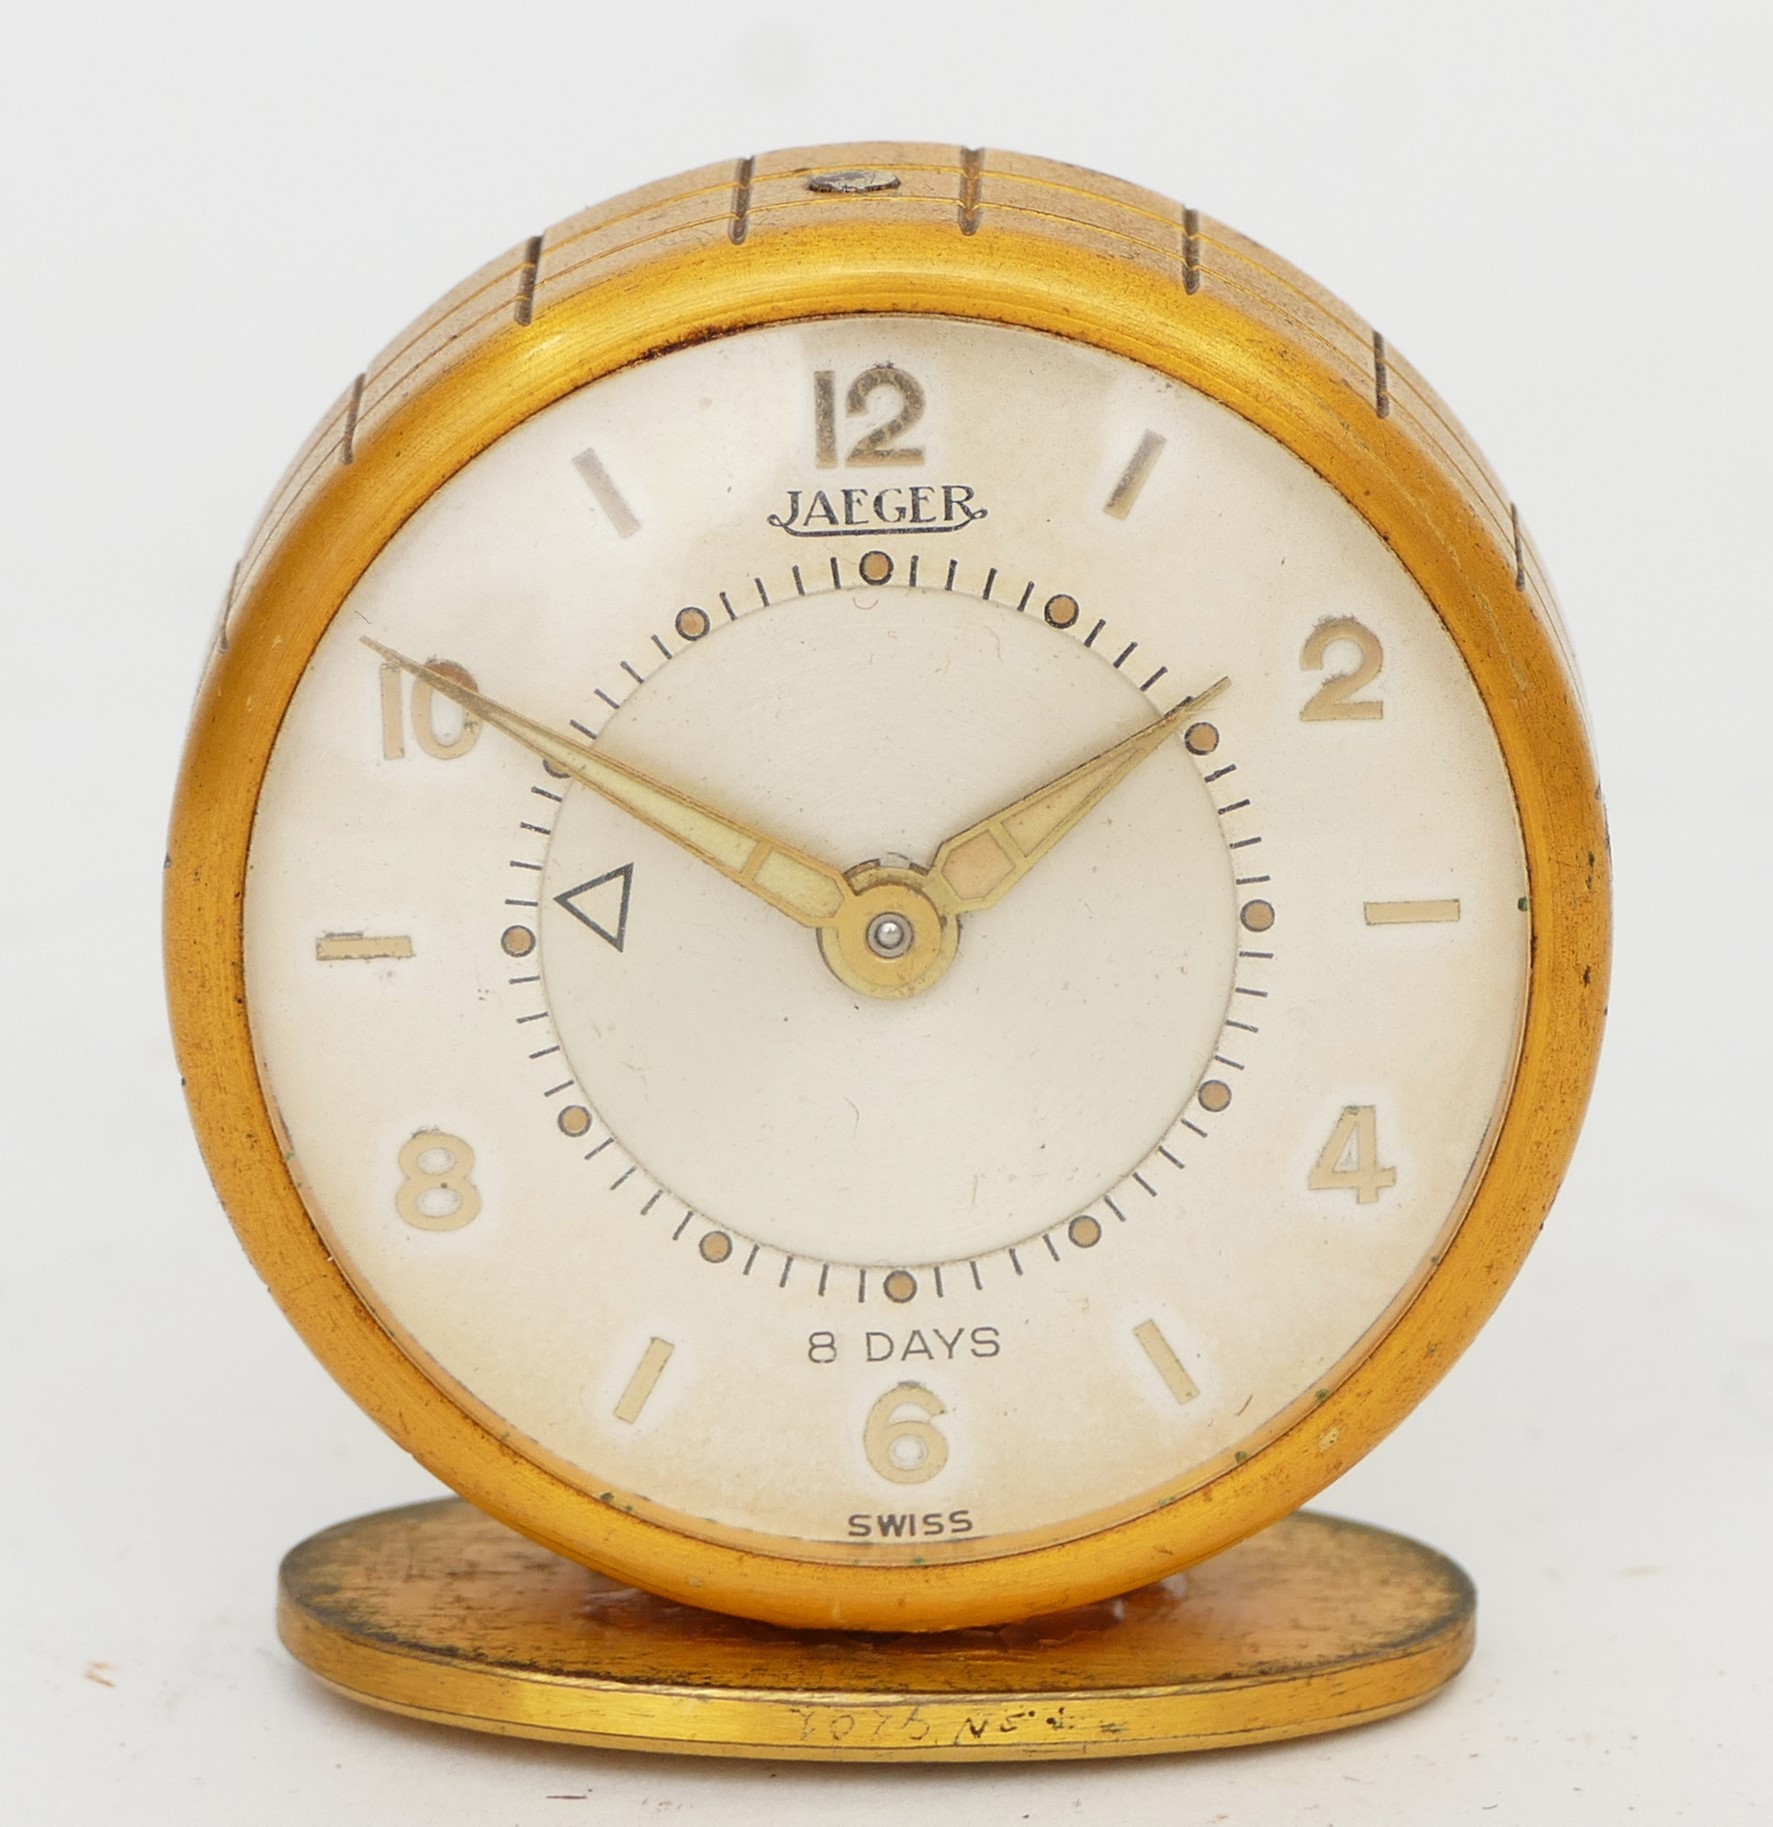 Jaeger, a gilt metal 8 day travel alarm clock, model 51, mounted on a stand, with original 1956